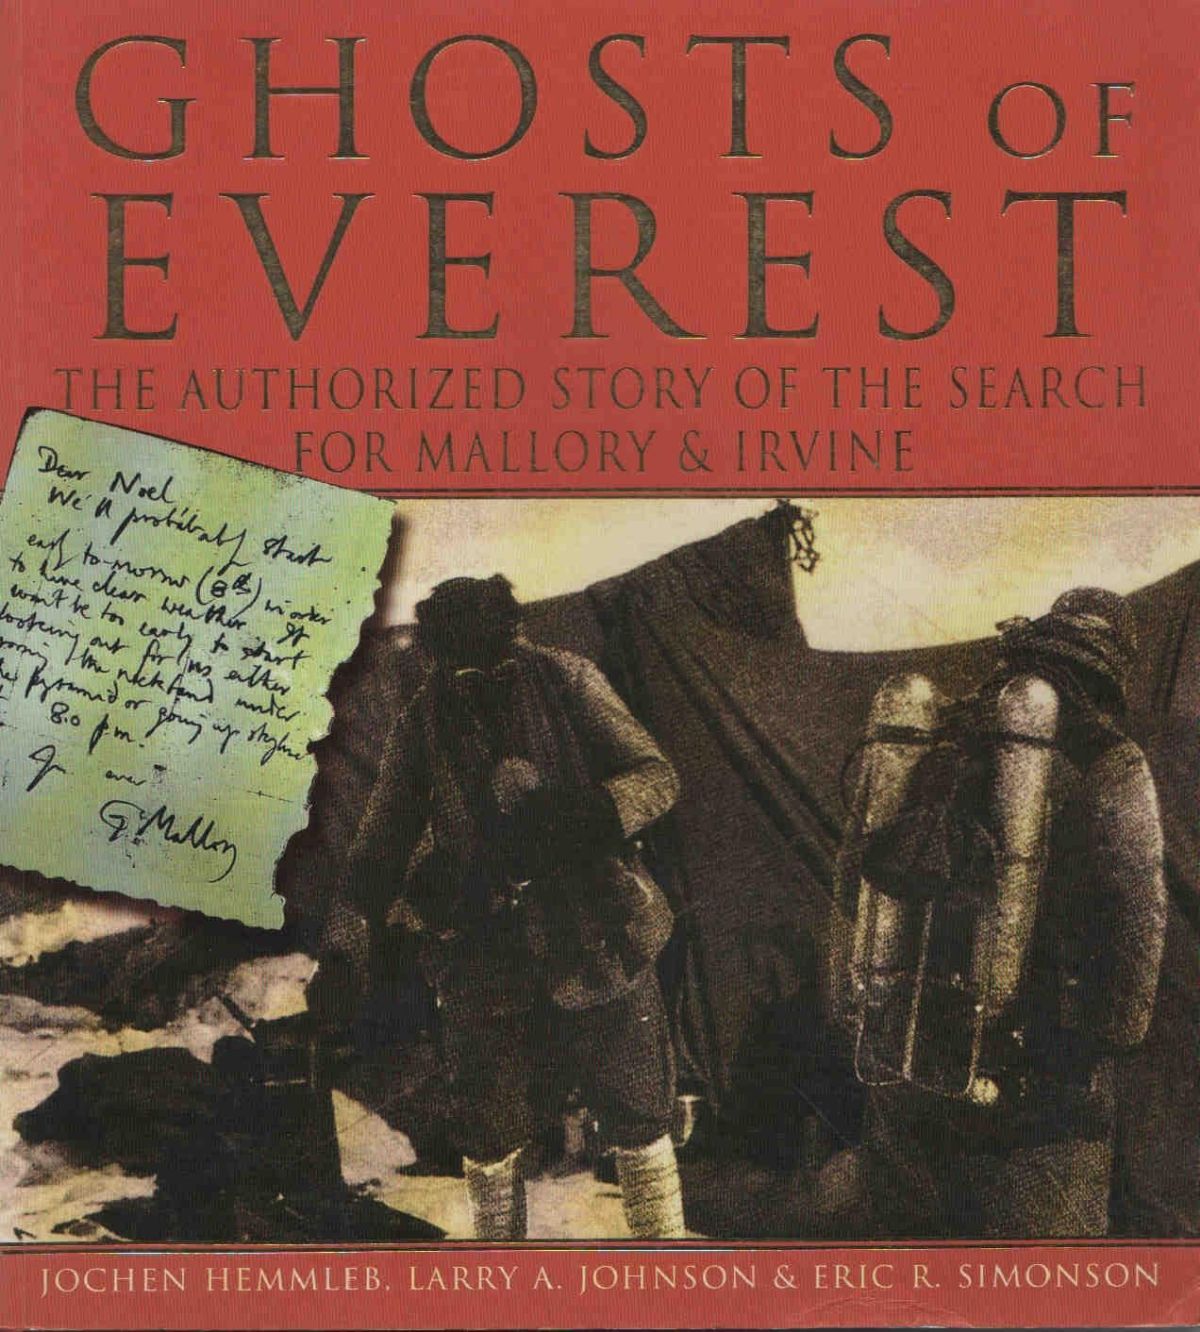 GHOSTS OF EVEREST: The Authorised Story of The Search for Mallory & Irvine